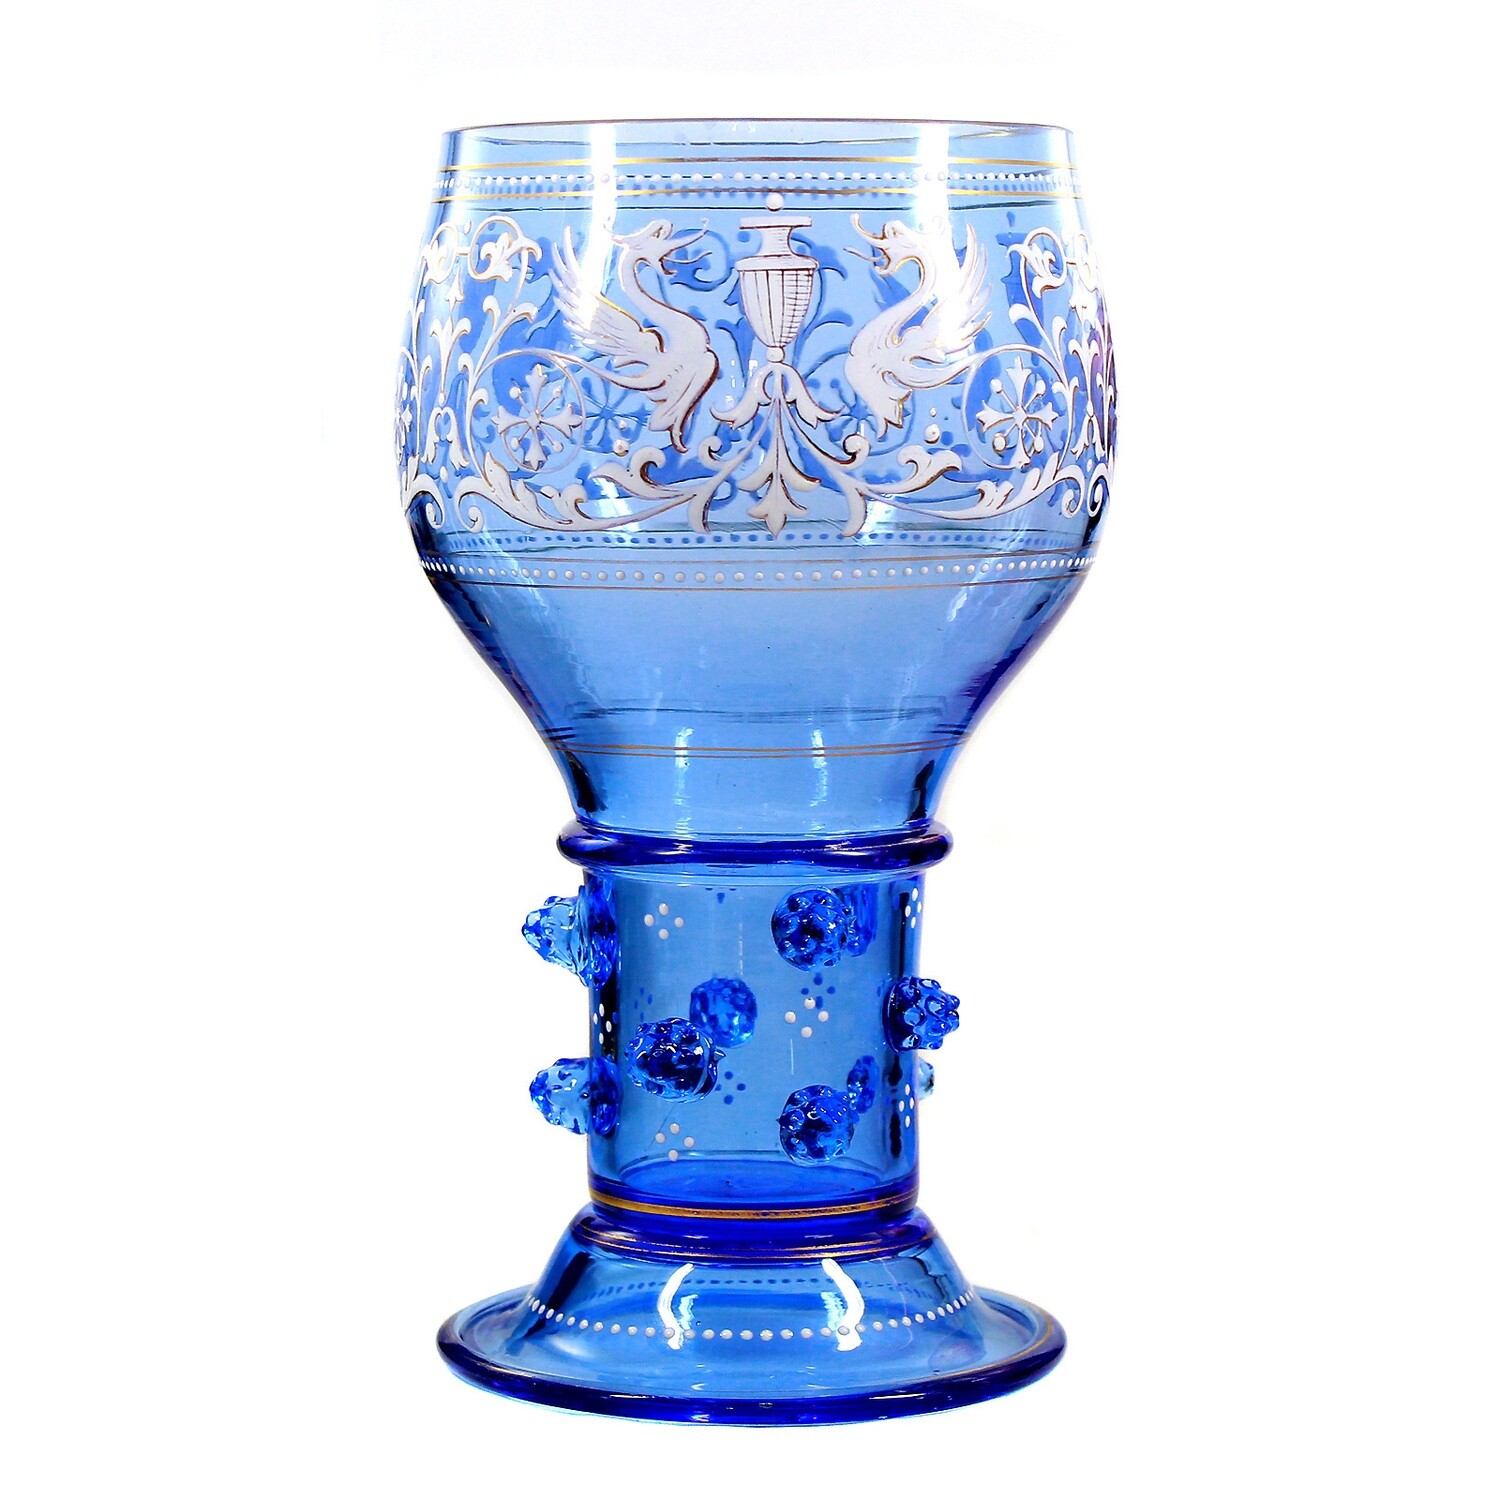 Rare cup made of aquamarine blue glass with mythical creatures, F. Heckert, duck. Jumble